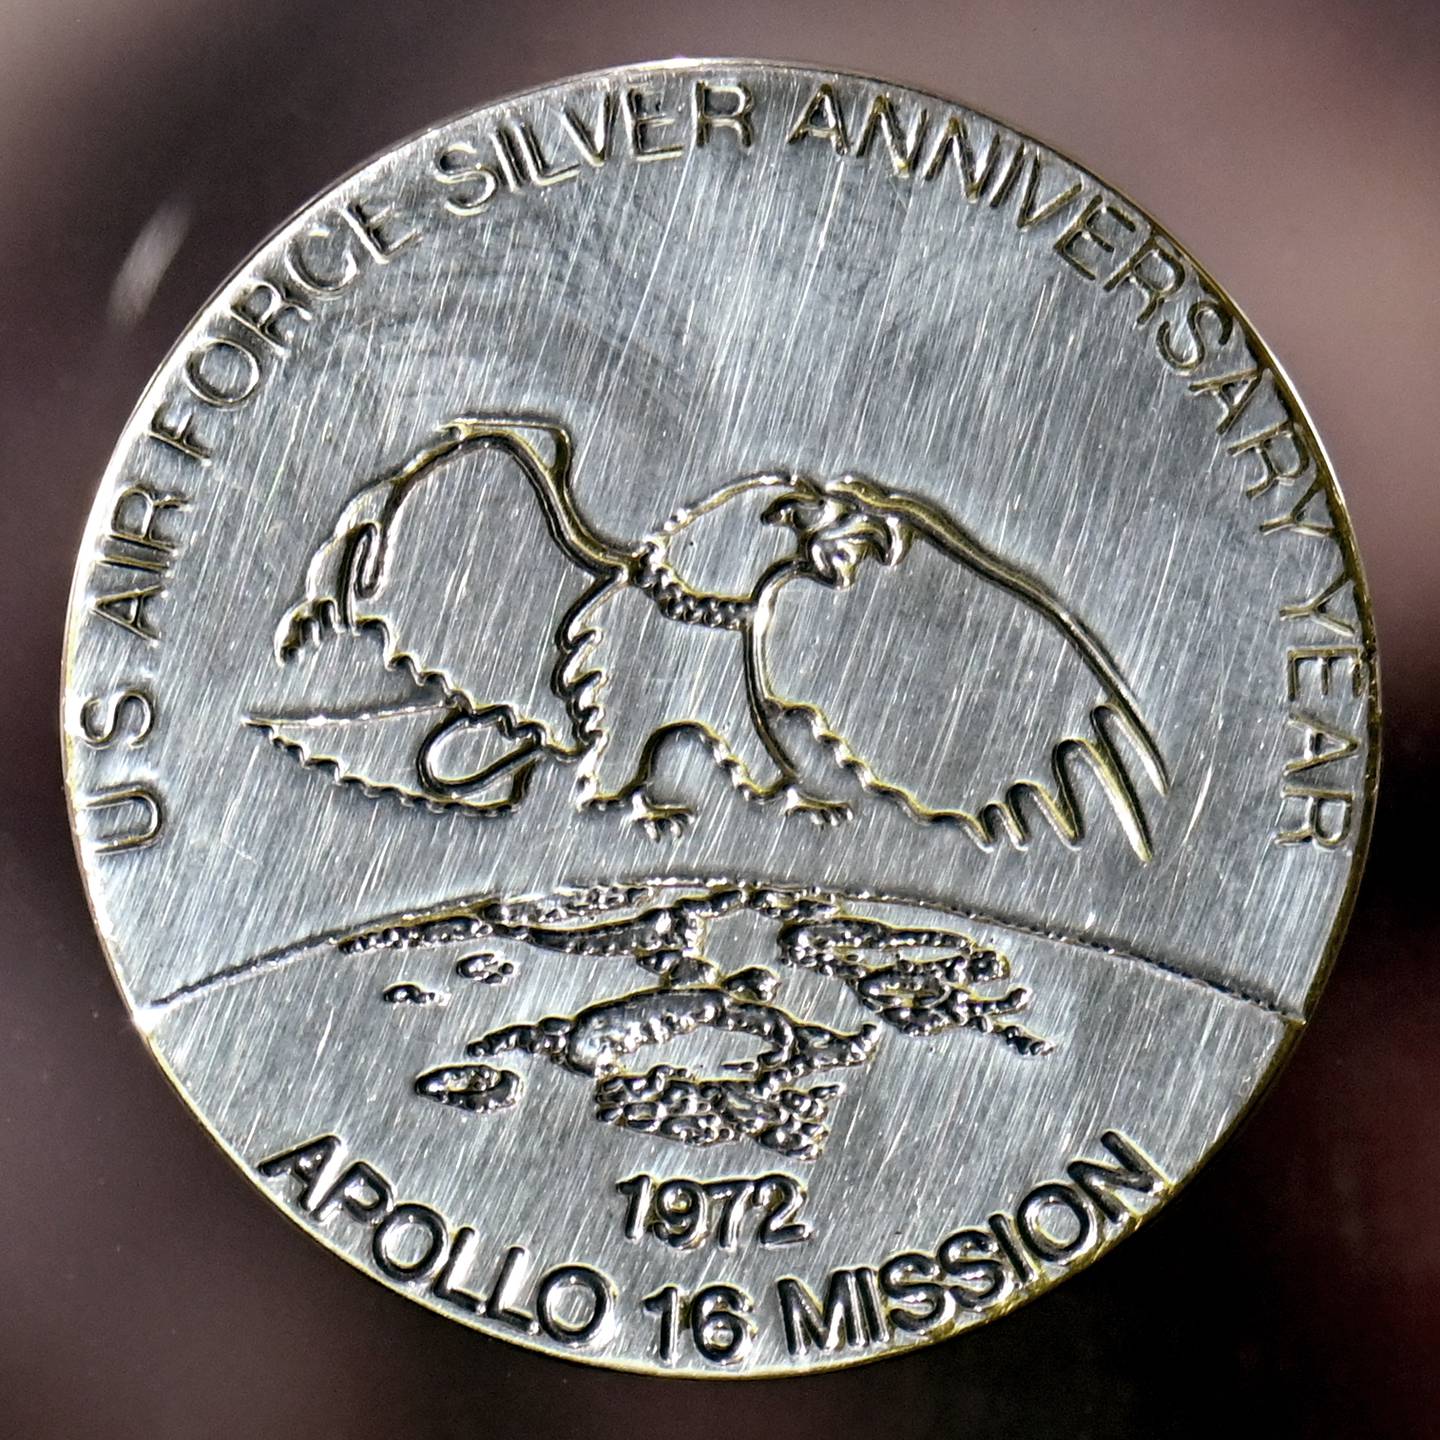 This commemorative medallion was taken to the moon by U.S. Air Force Colonel Charles M. Duke, Jr., Lunar Module Pilot for the Apollo 16 mission. A second, duplicate coin was left at the Descartes moon site by Duke in commemoration of the Silver Anniversary of the Air Force. The medallion, a moon rock and a flag were presented to the Air Force on July 13, 1972 by Duke. (Ty Greenlees/Air Force)